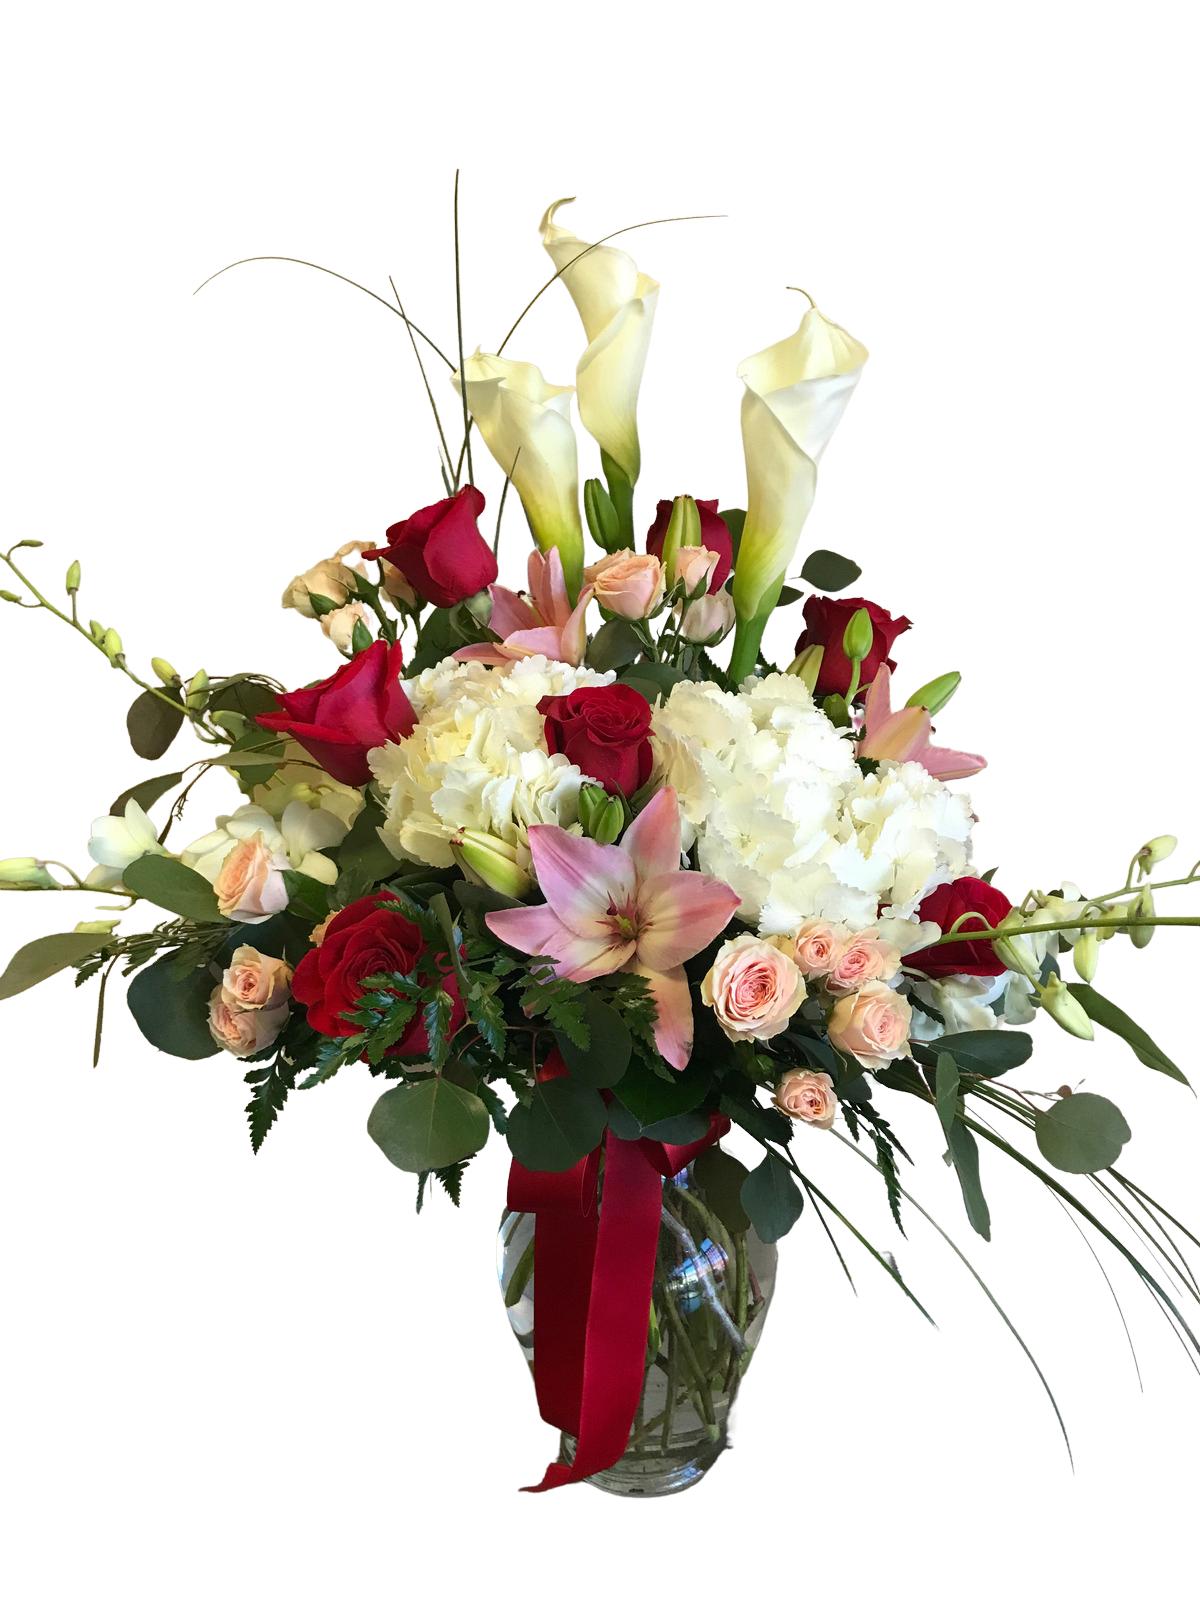 Endless Love - Calla Lilies, Hydrangea, Orchids, Lilies, Roses and Spray Roses in a glass vase with a variety of specialty greenery